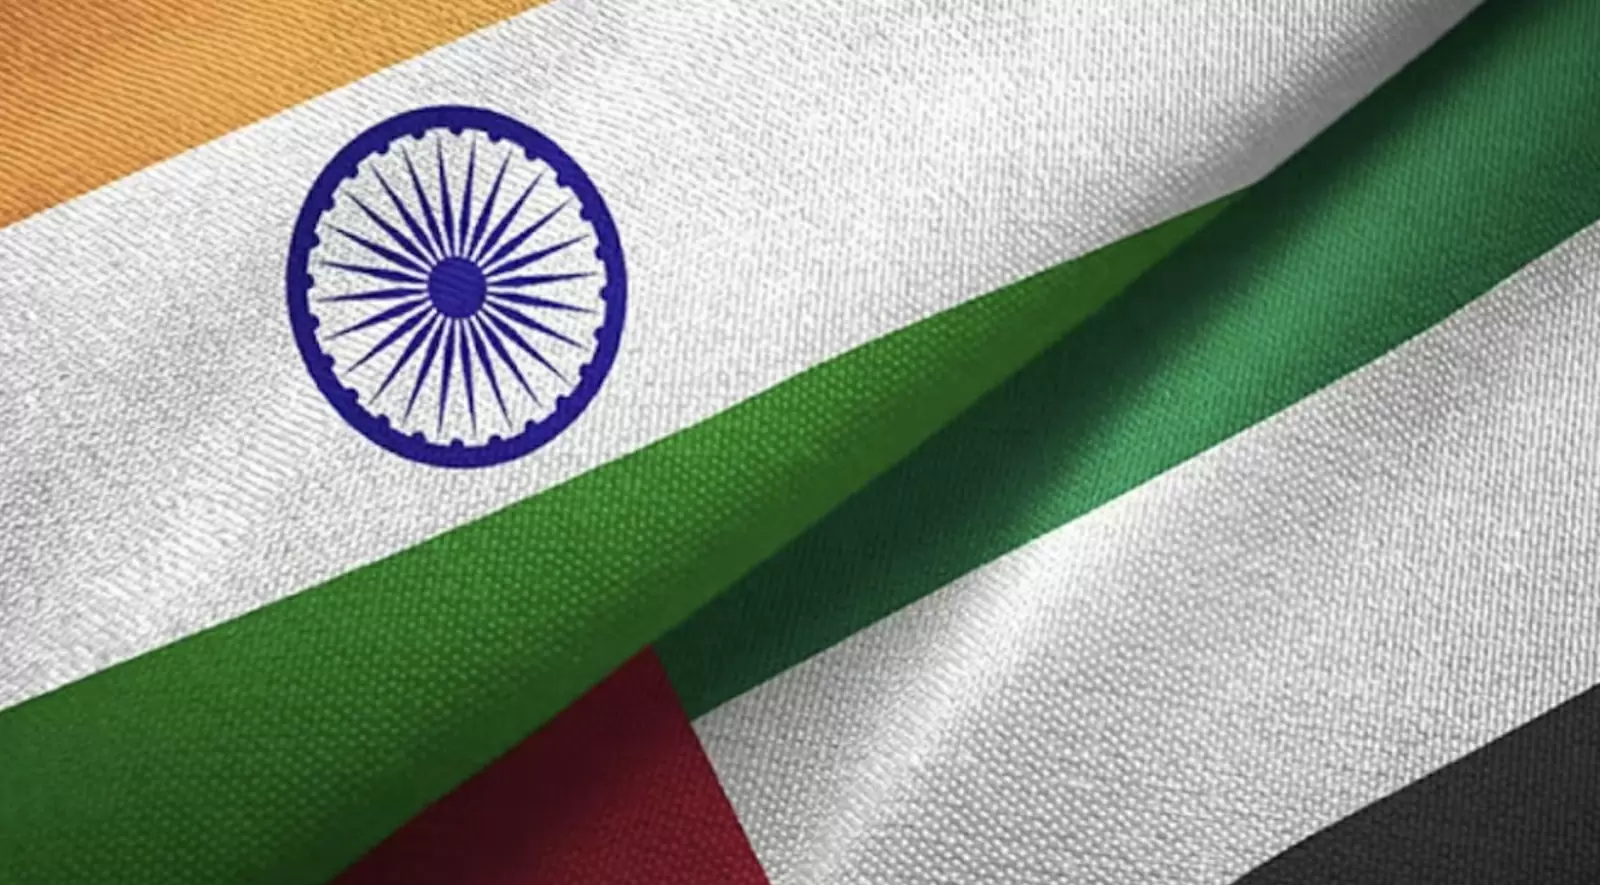 'Bilateral trade expected to reach $100 billion'; UAE is India's third largest trading partner